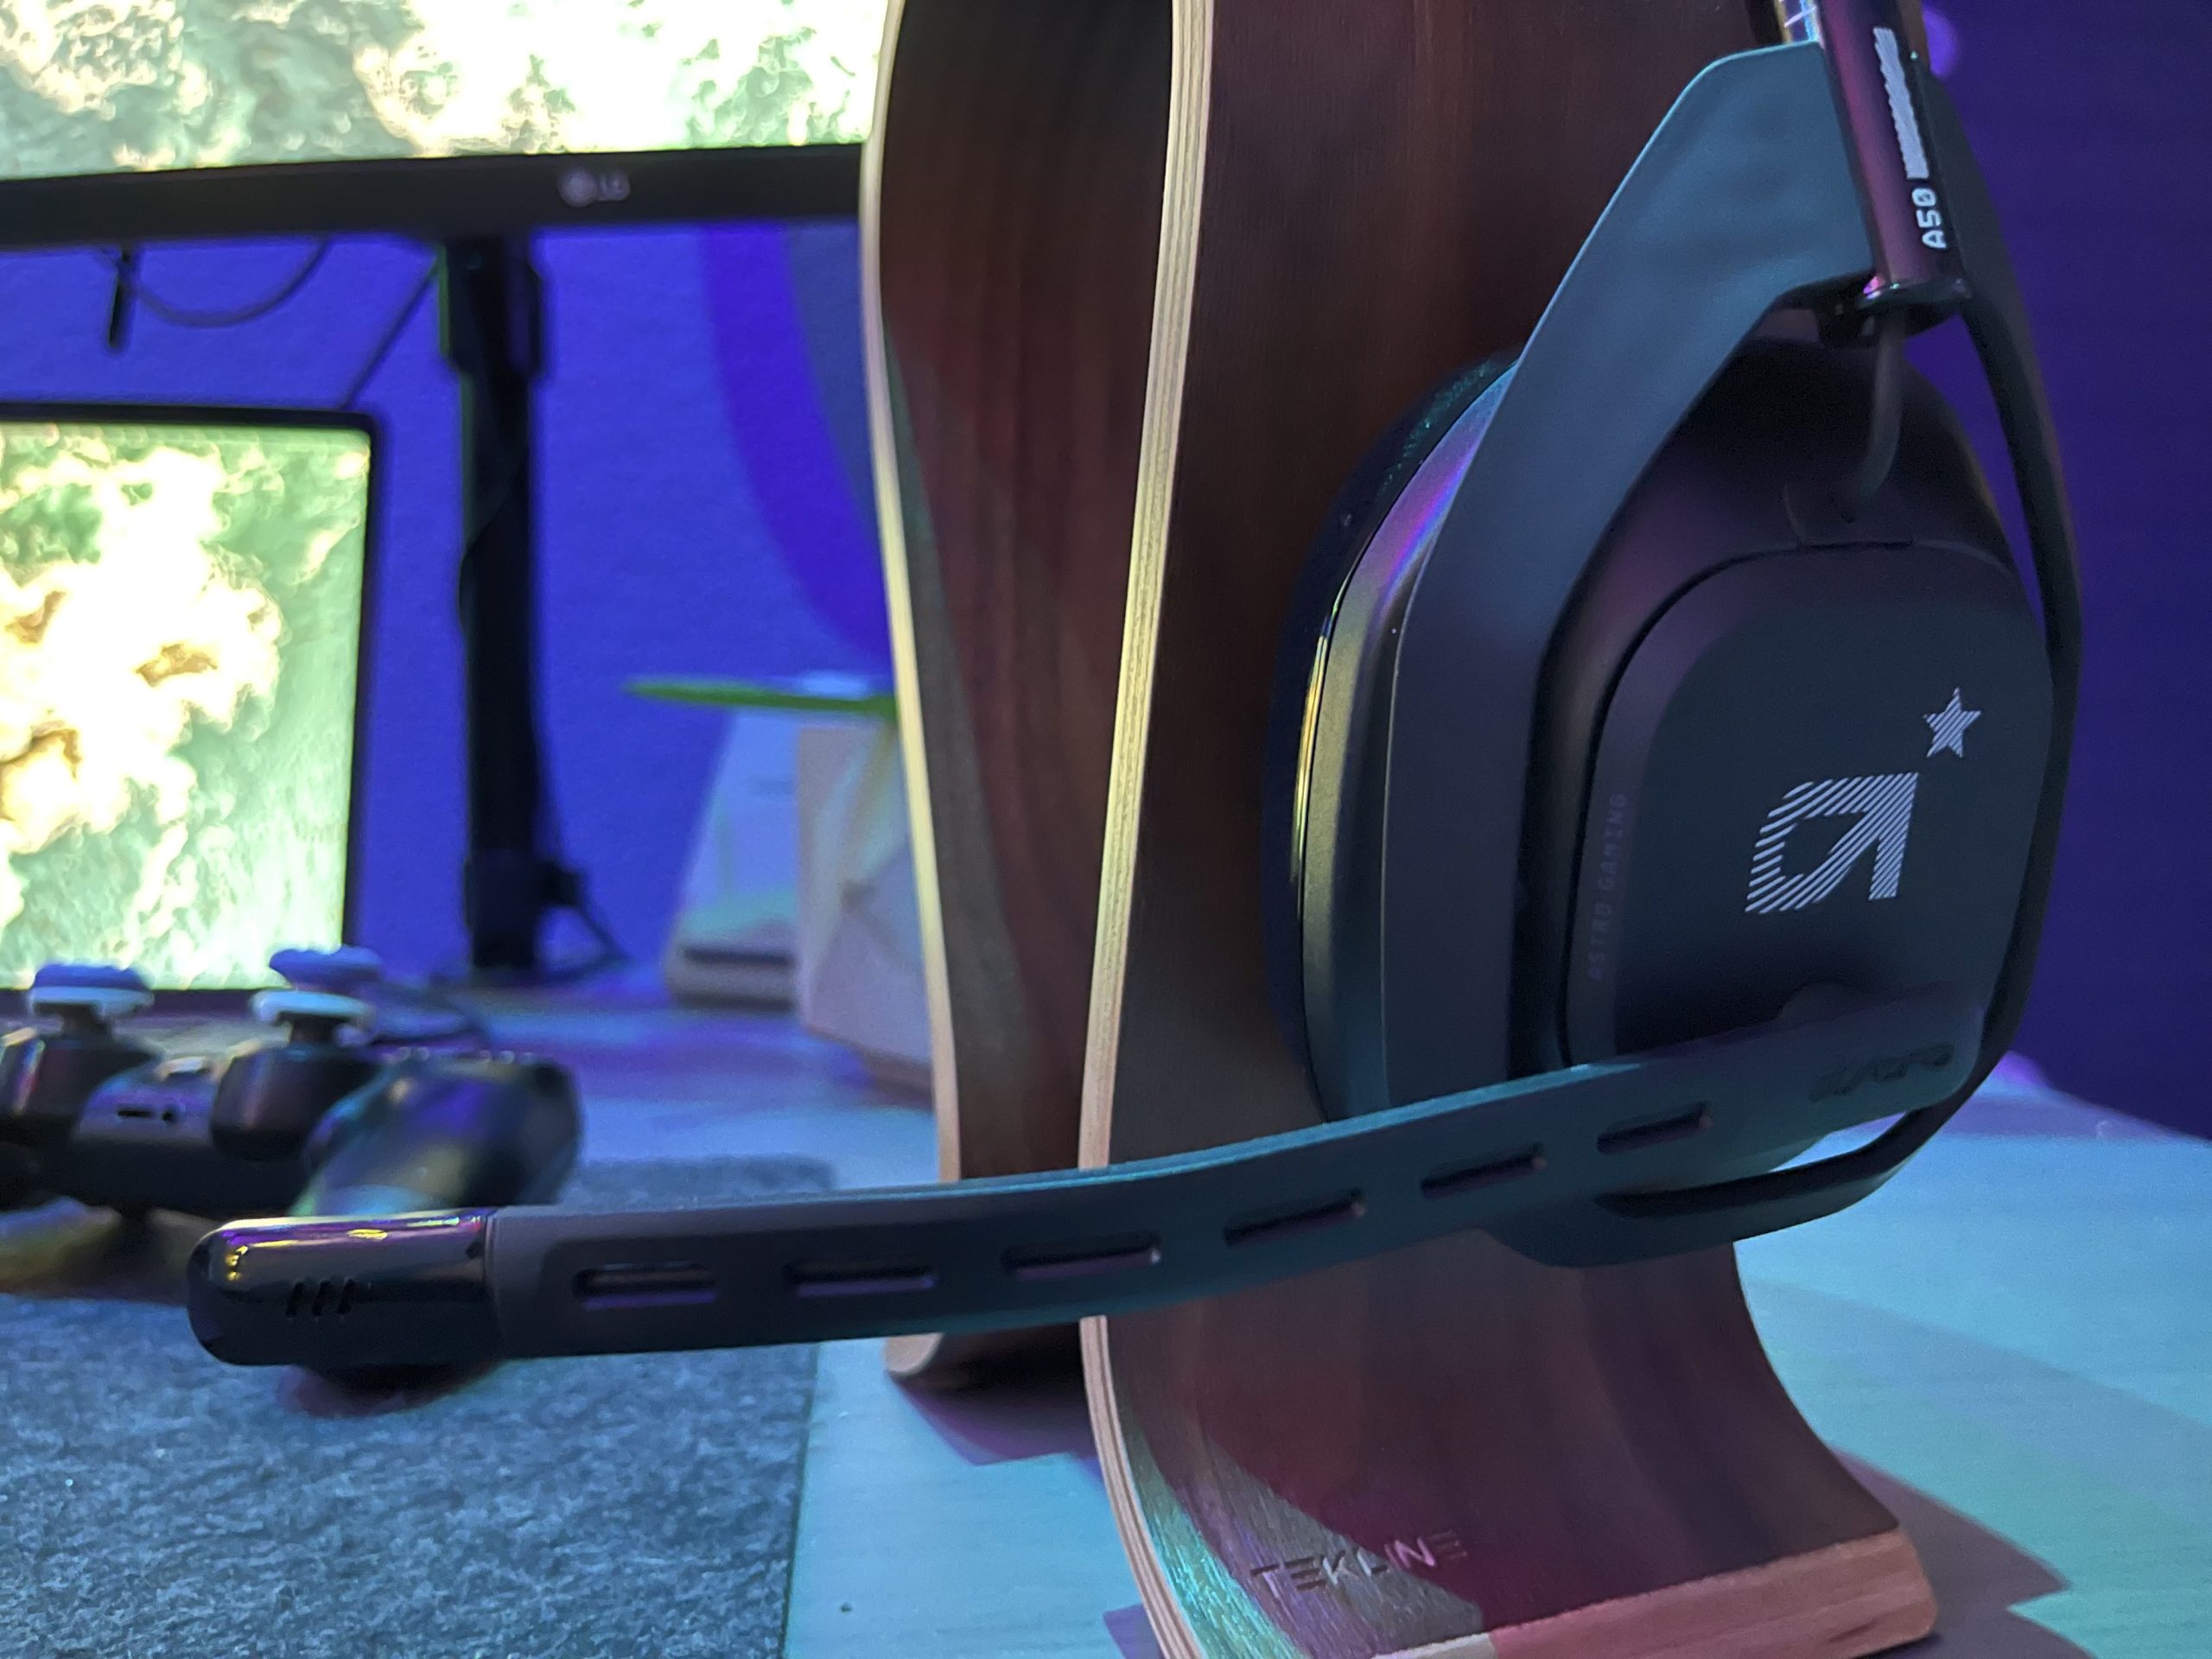 The Astro A50 wireless headset is incredibly expensive and has some of the worst sound quality we've ever heard.